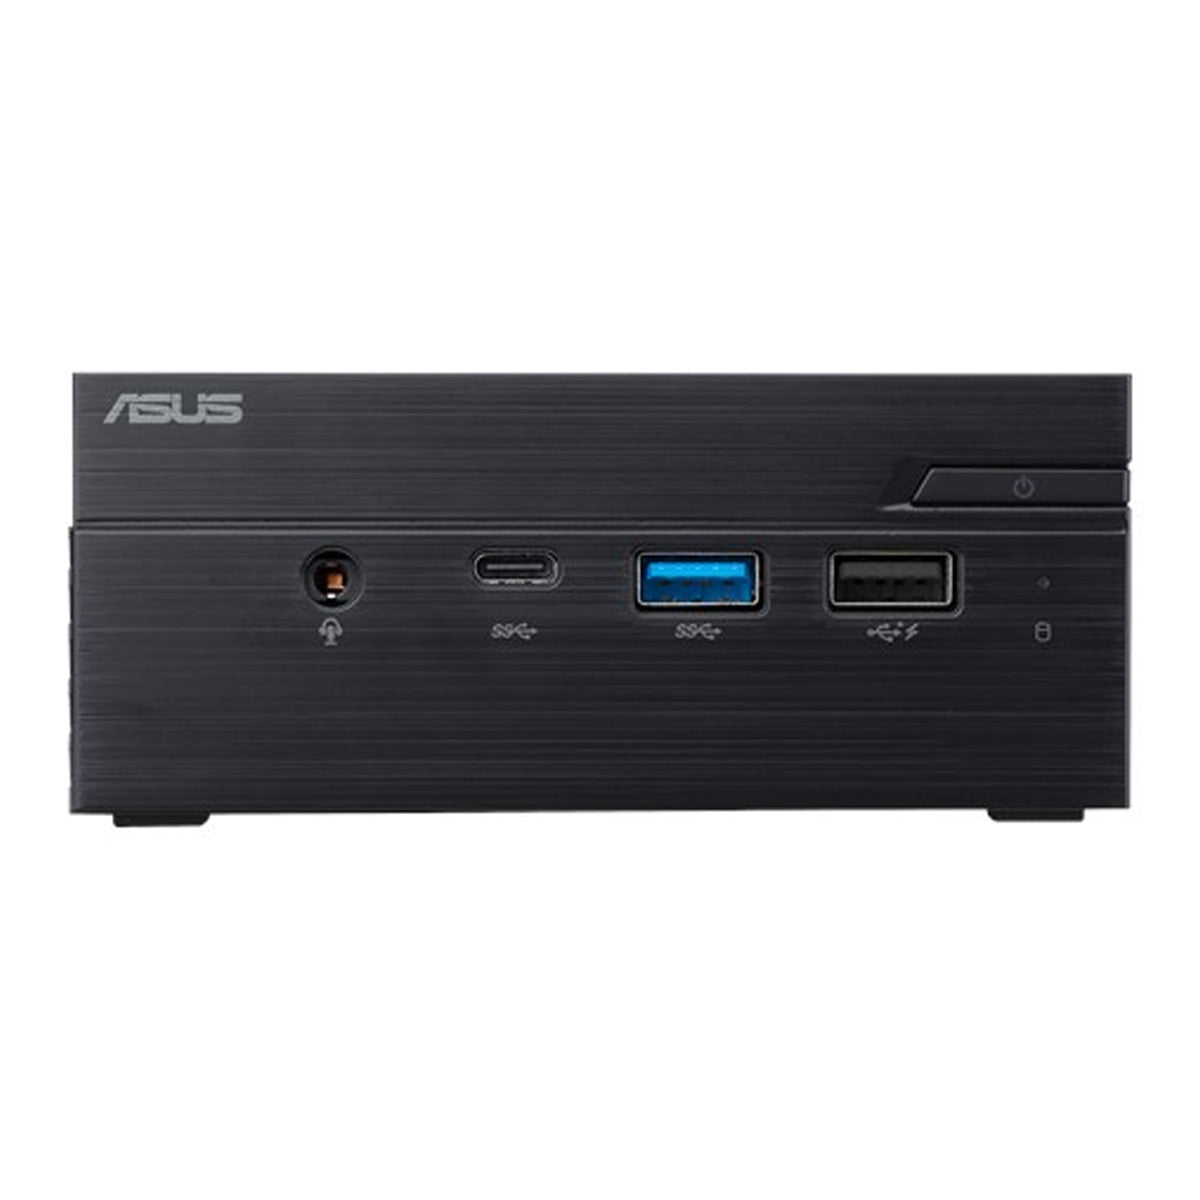 [RePacked]ASUS Mini PC PN40 with Intel Celeron N4000 Processor DDR4 RAM 4K UHD Support, Wi-Fi and USB 3.1 Type-C [ Without storage ,Without Ram]